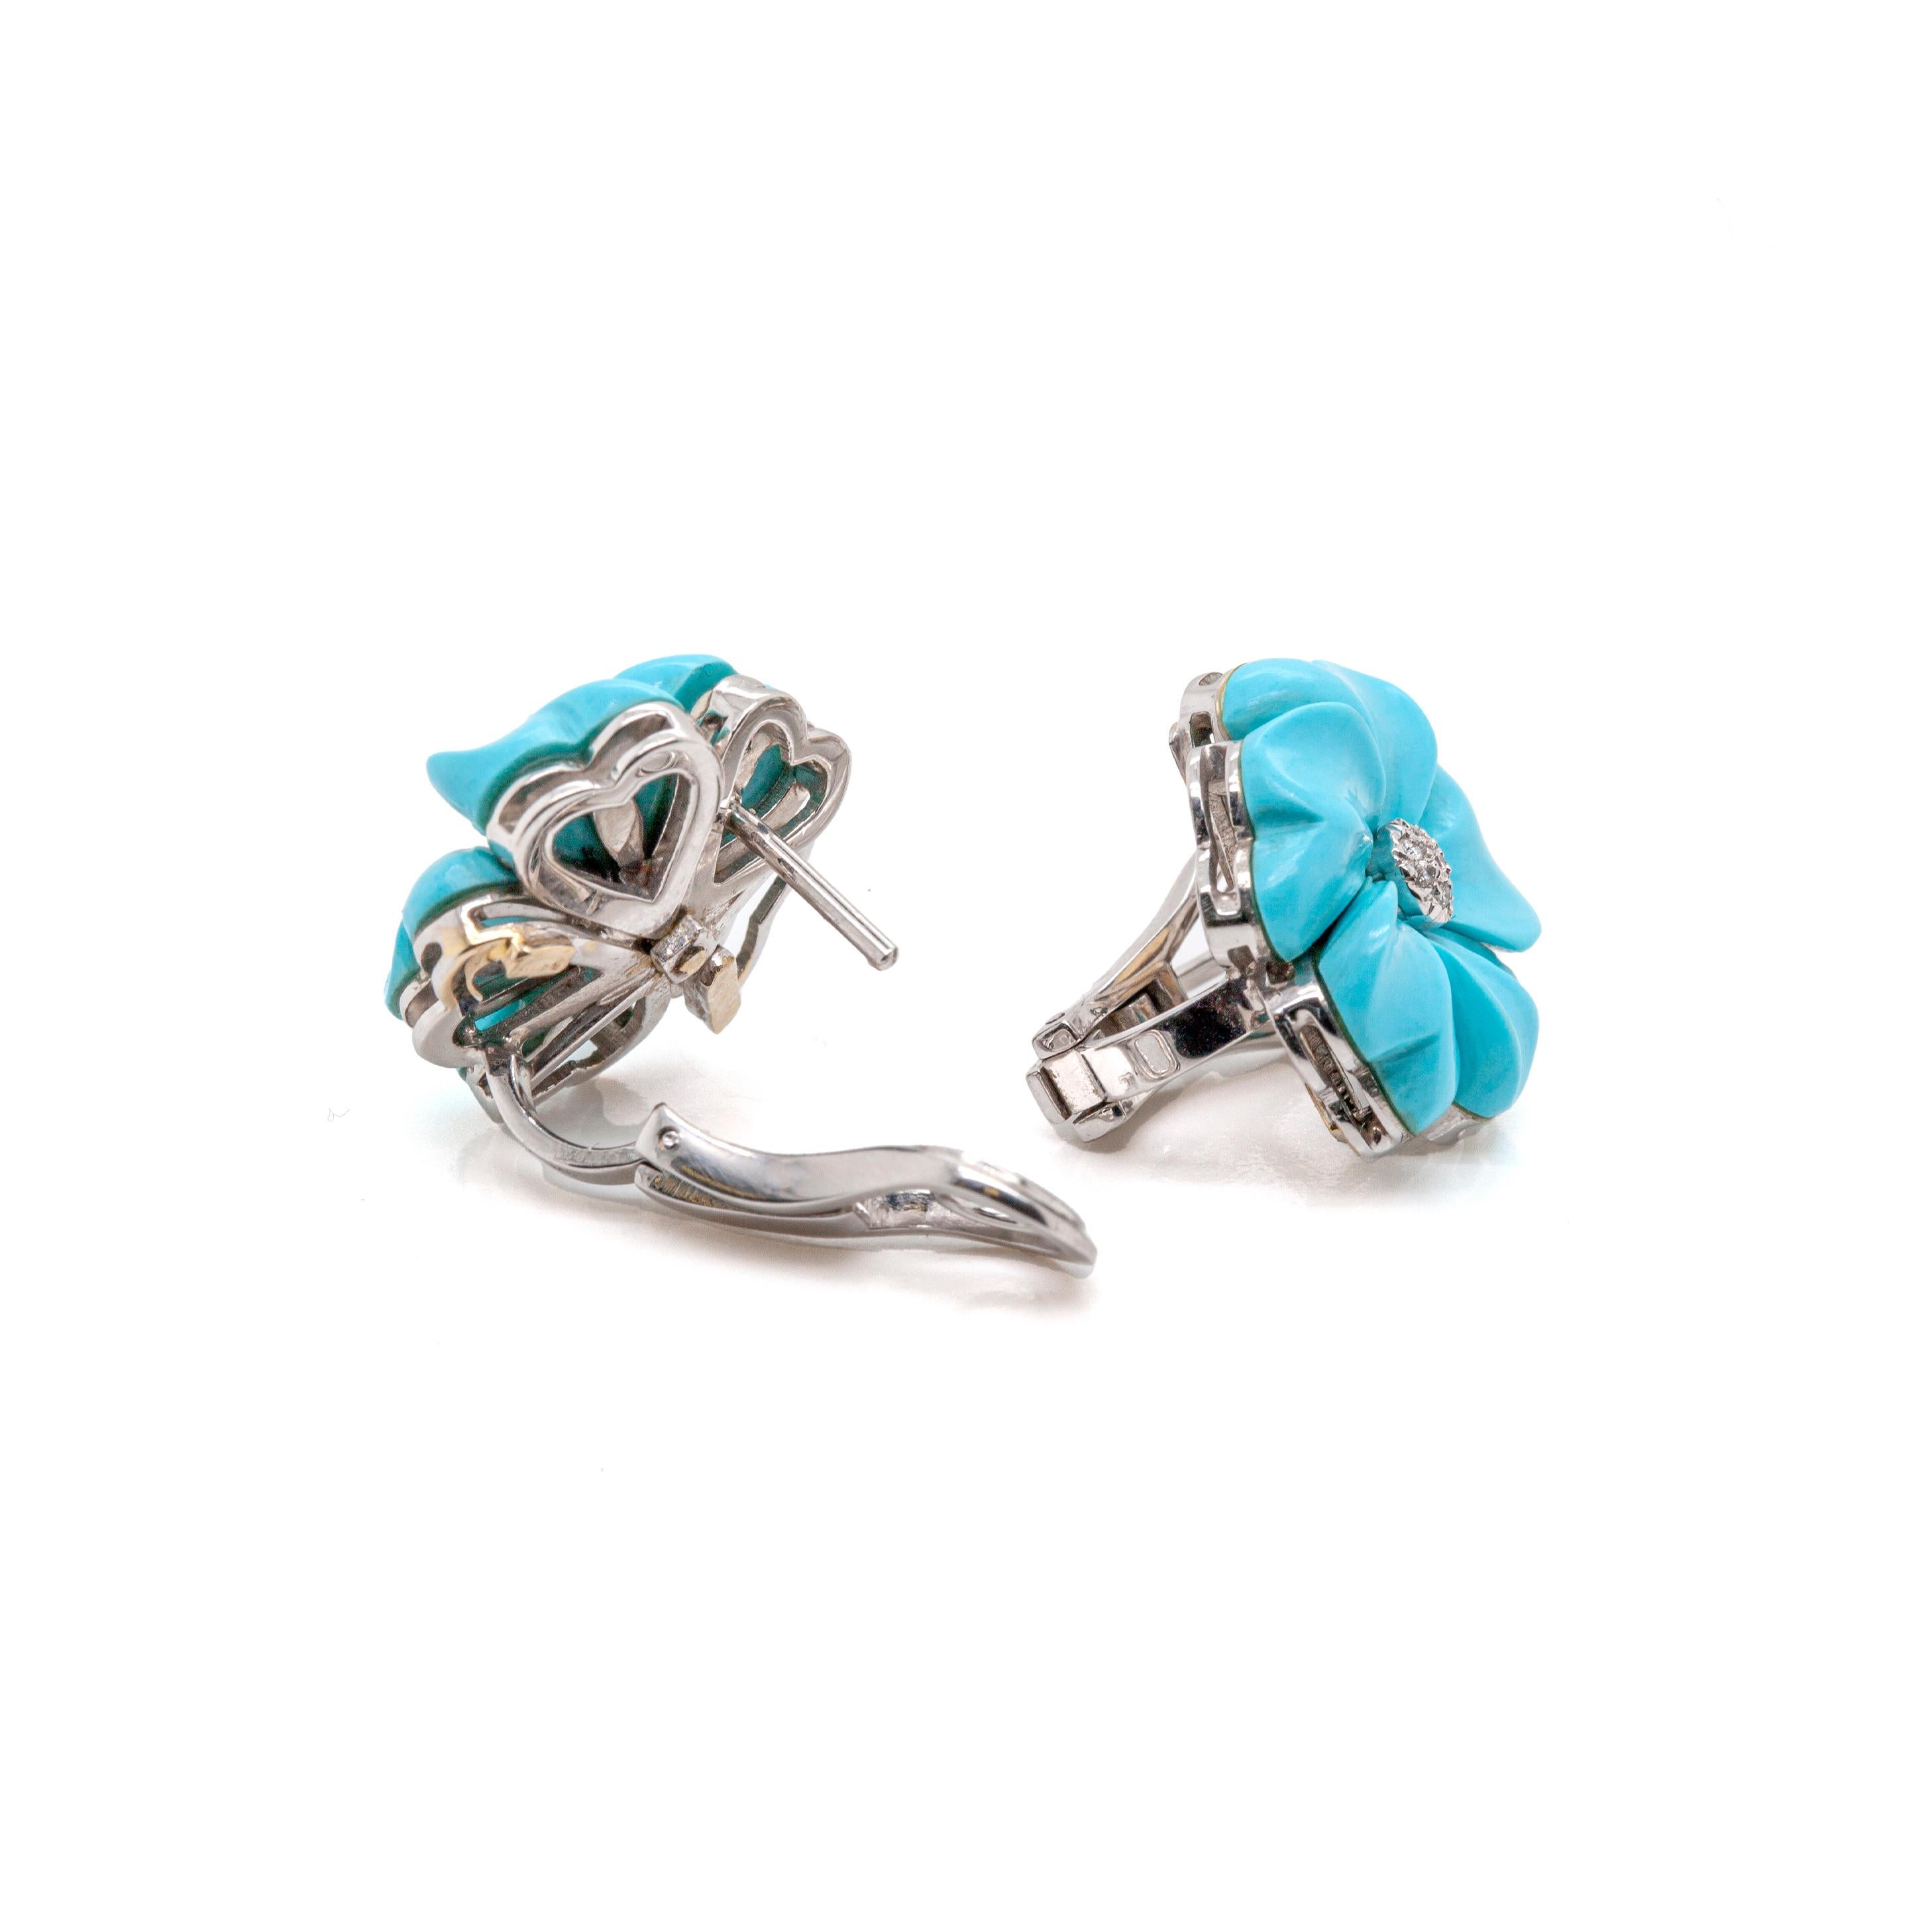 Adorn your ears with this charming pair of stud earrings made of hand-carved natural turquoise, white diamonds and 18 carat white gold.

Each earring features a wonderful meticulously hand carved turquoise flower expertly mounted in an 18 carat